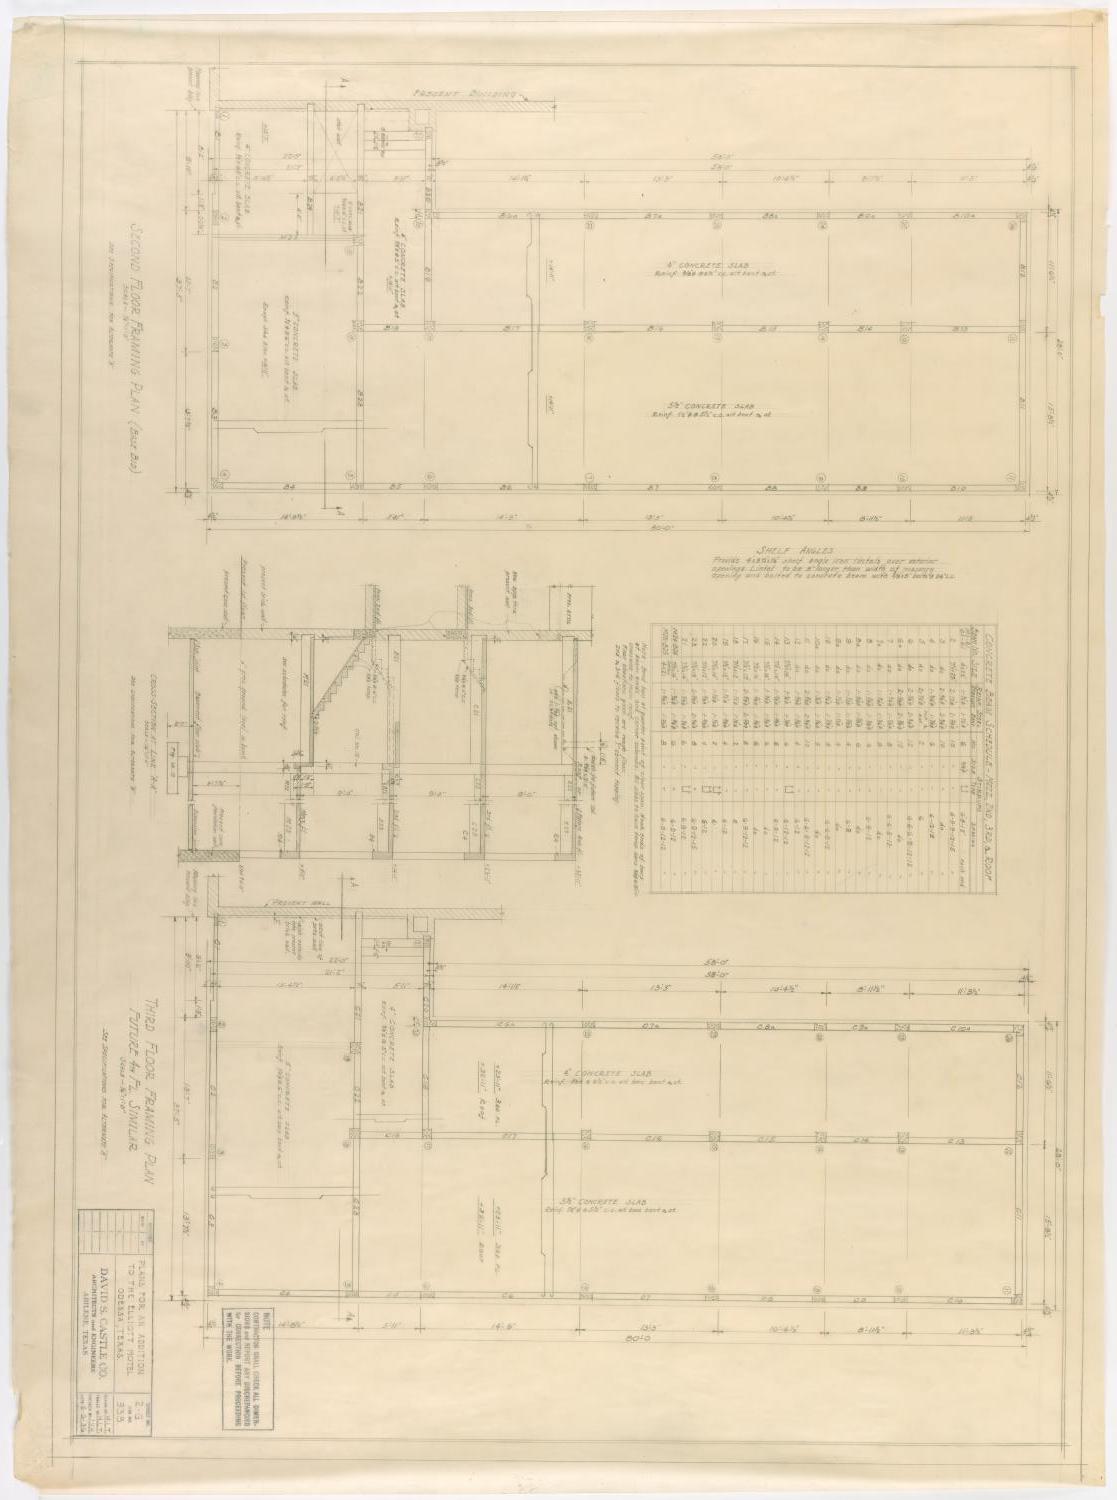 Elliott Hotel Addition, Odessa, Texas: Framing Plans and Schedule
                                                
                                                    [Sequence #]: 1 of 2
                                                